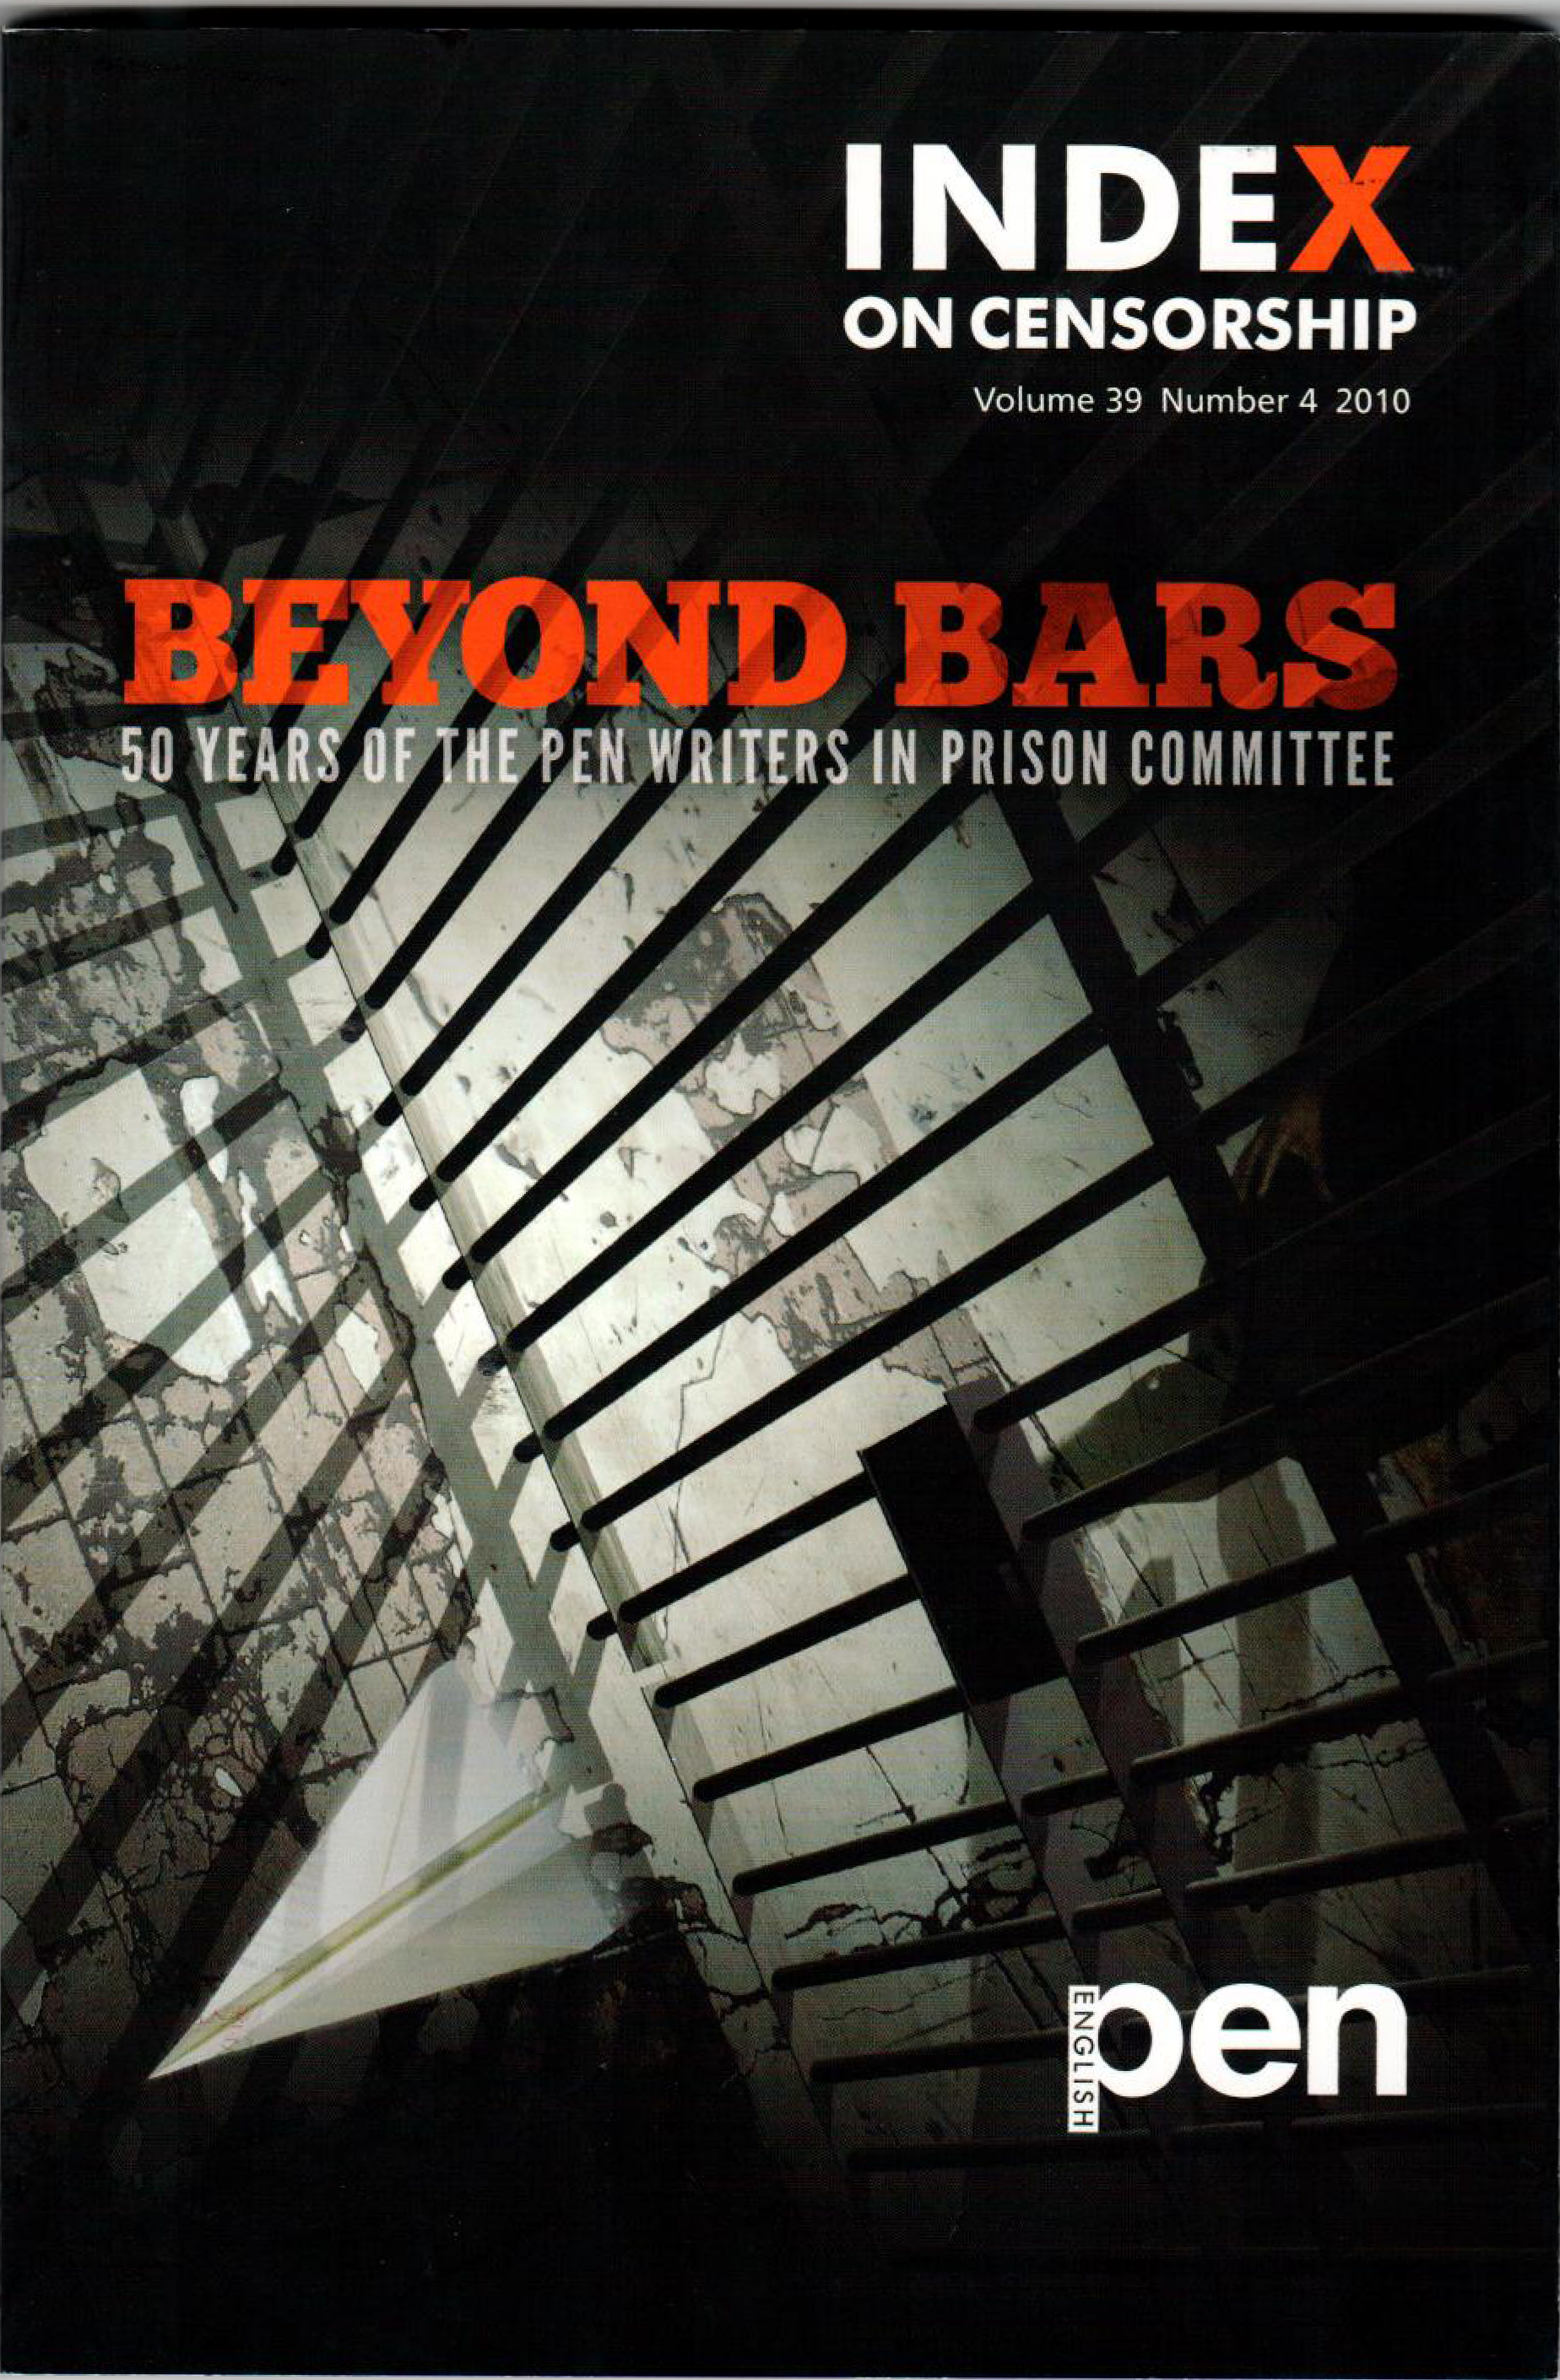 Beyond Bars, the winter 2010 edition of Index on Censorship magazine